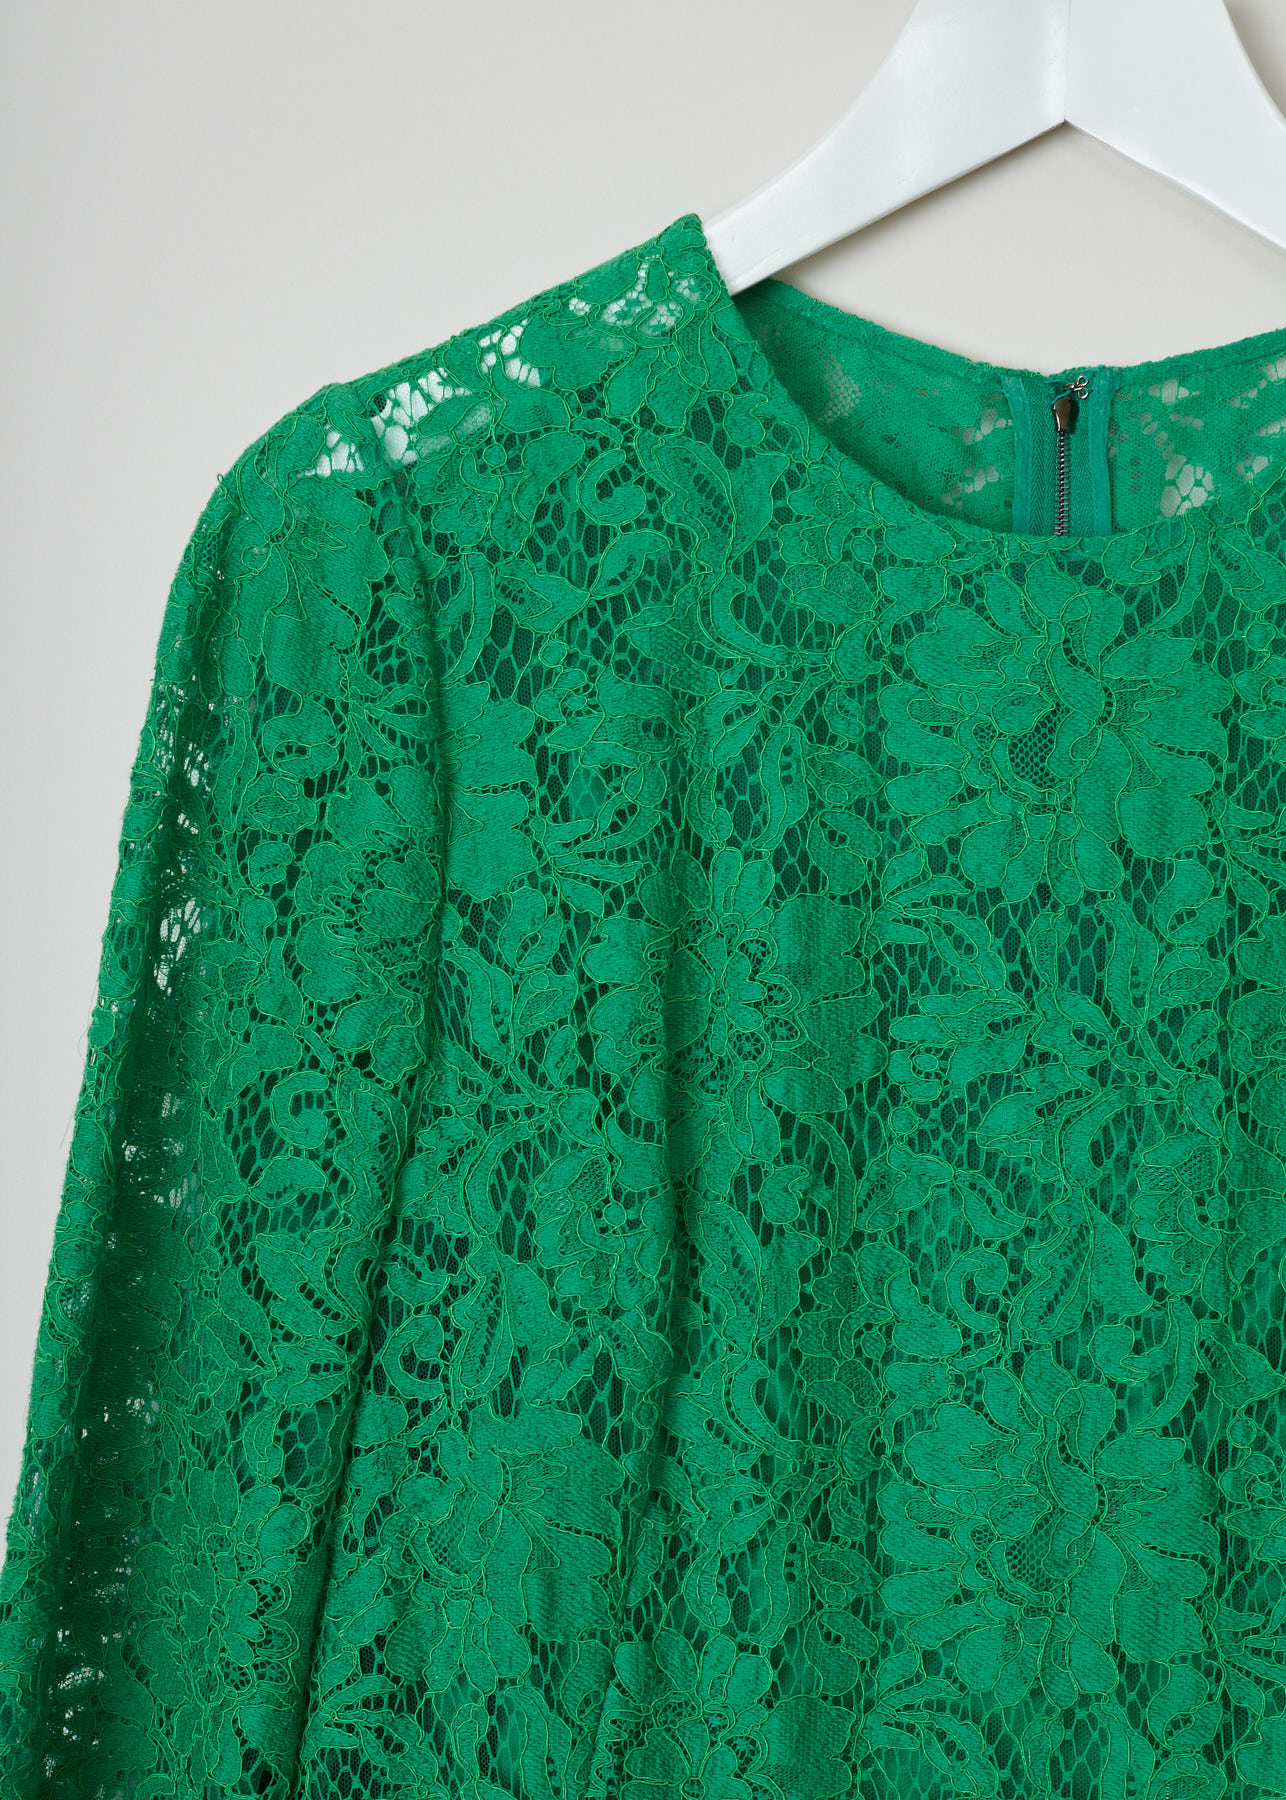 Dolce & Gabbana, Floral laced long sleeve flaired dress,  F6VB6T_FLM9V_V0402, detail2, An intricately laced dress, with an beautifull floral patern stitched on a green meshing. Long frilled sleeves. Closes with a zip fastening along the back.